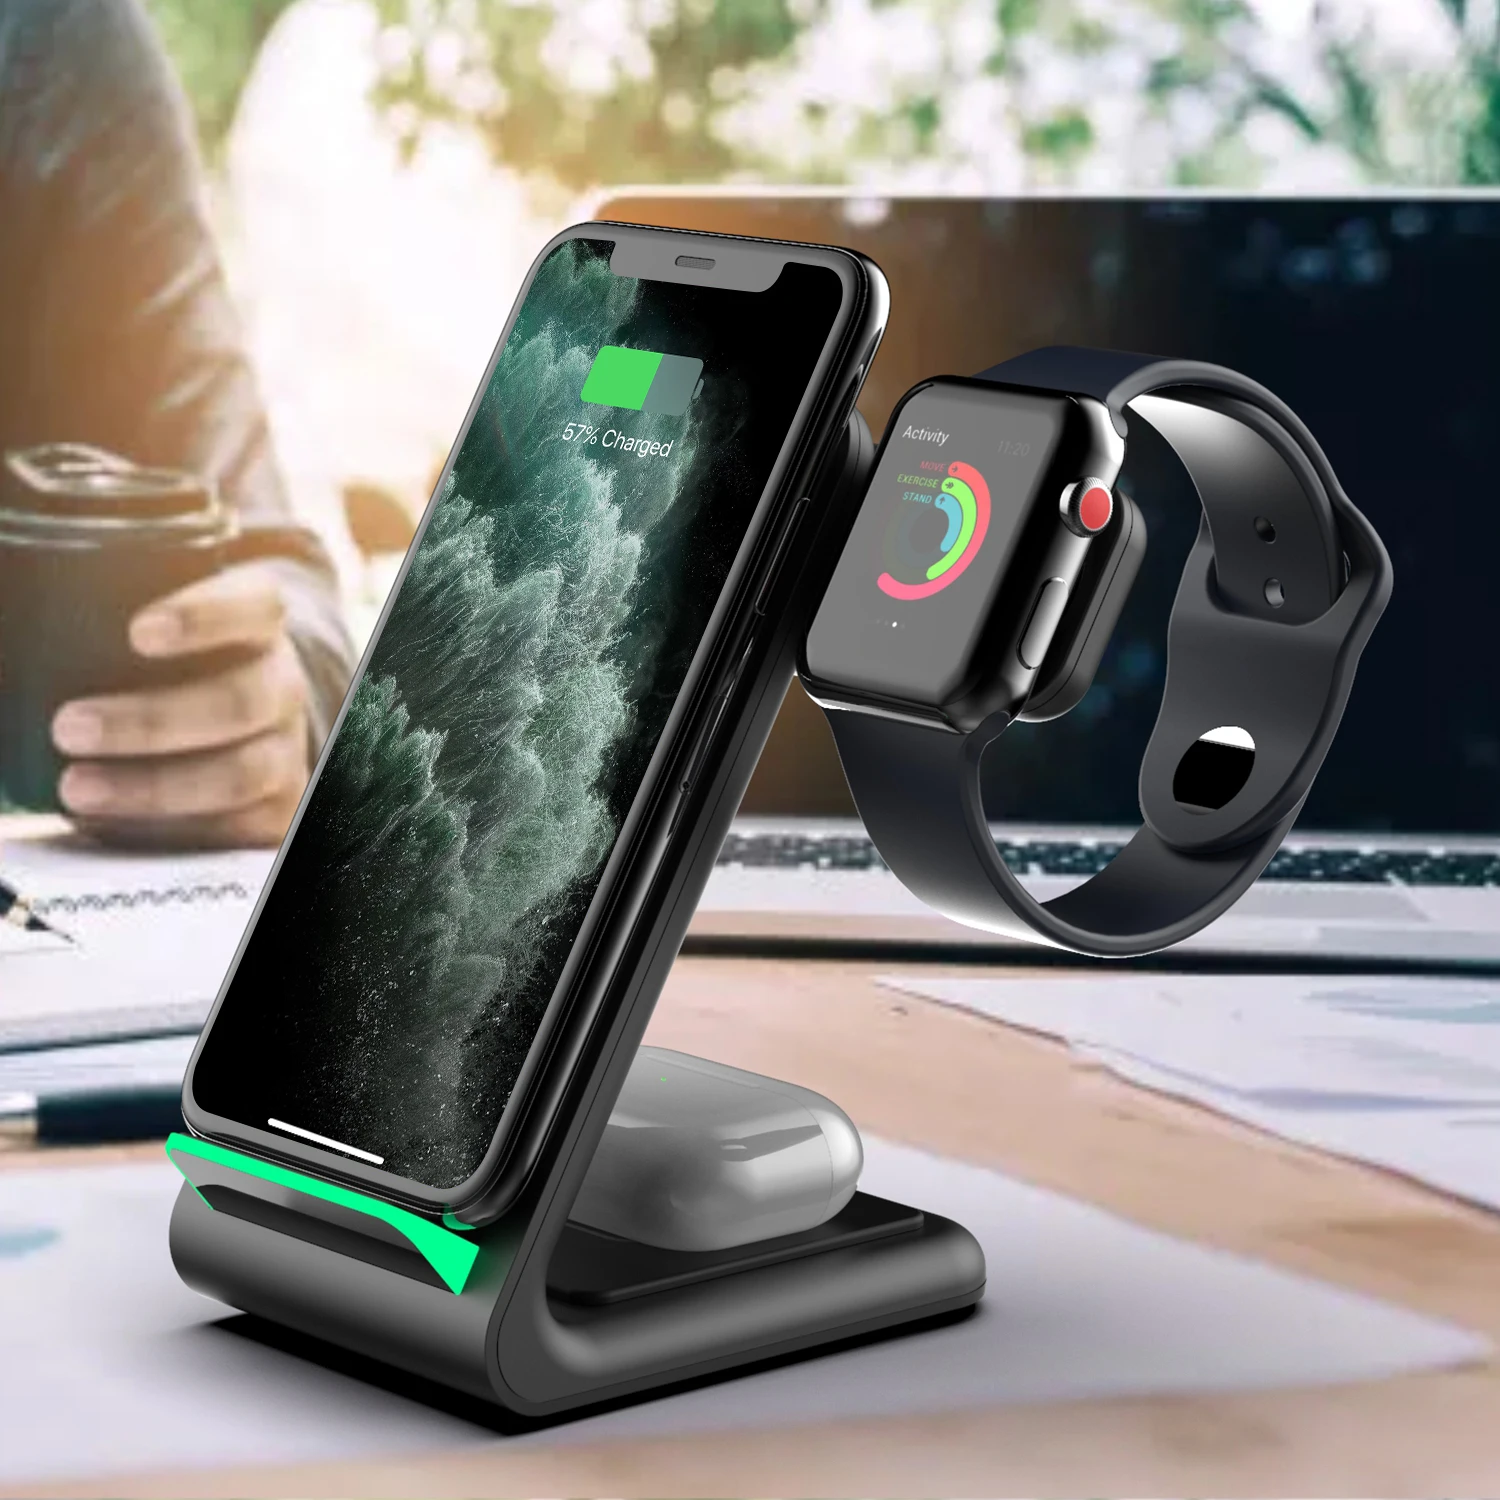 

3 in 1 15w 10w Fast Charge Wireless Charger Stand Earphone Watch holder Qi Wireless Charging Multifuncion Station for iPhone